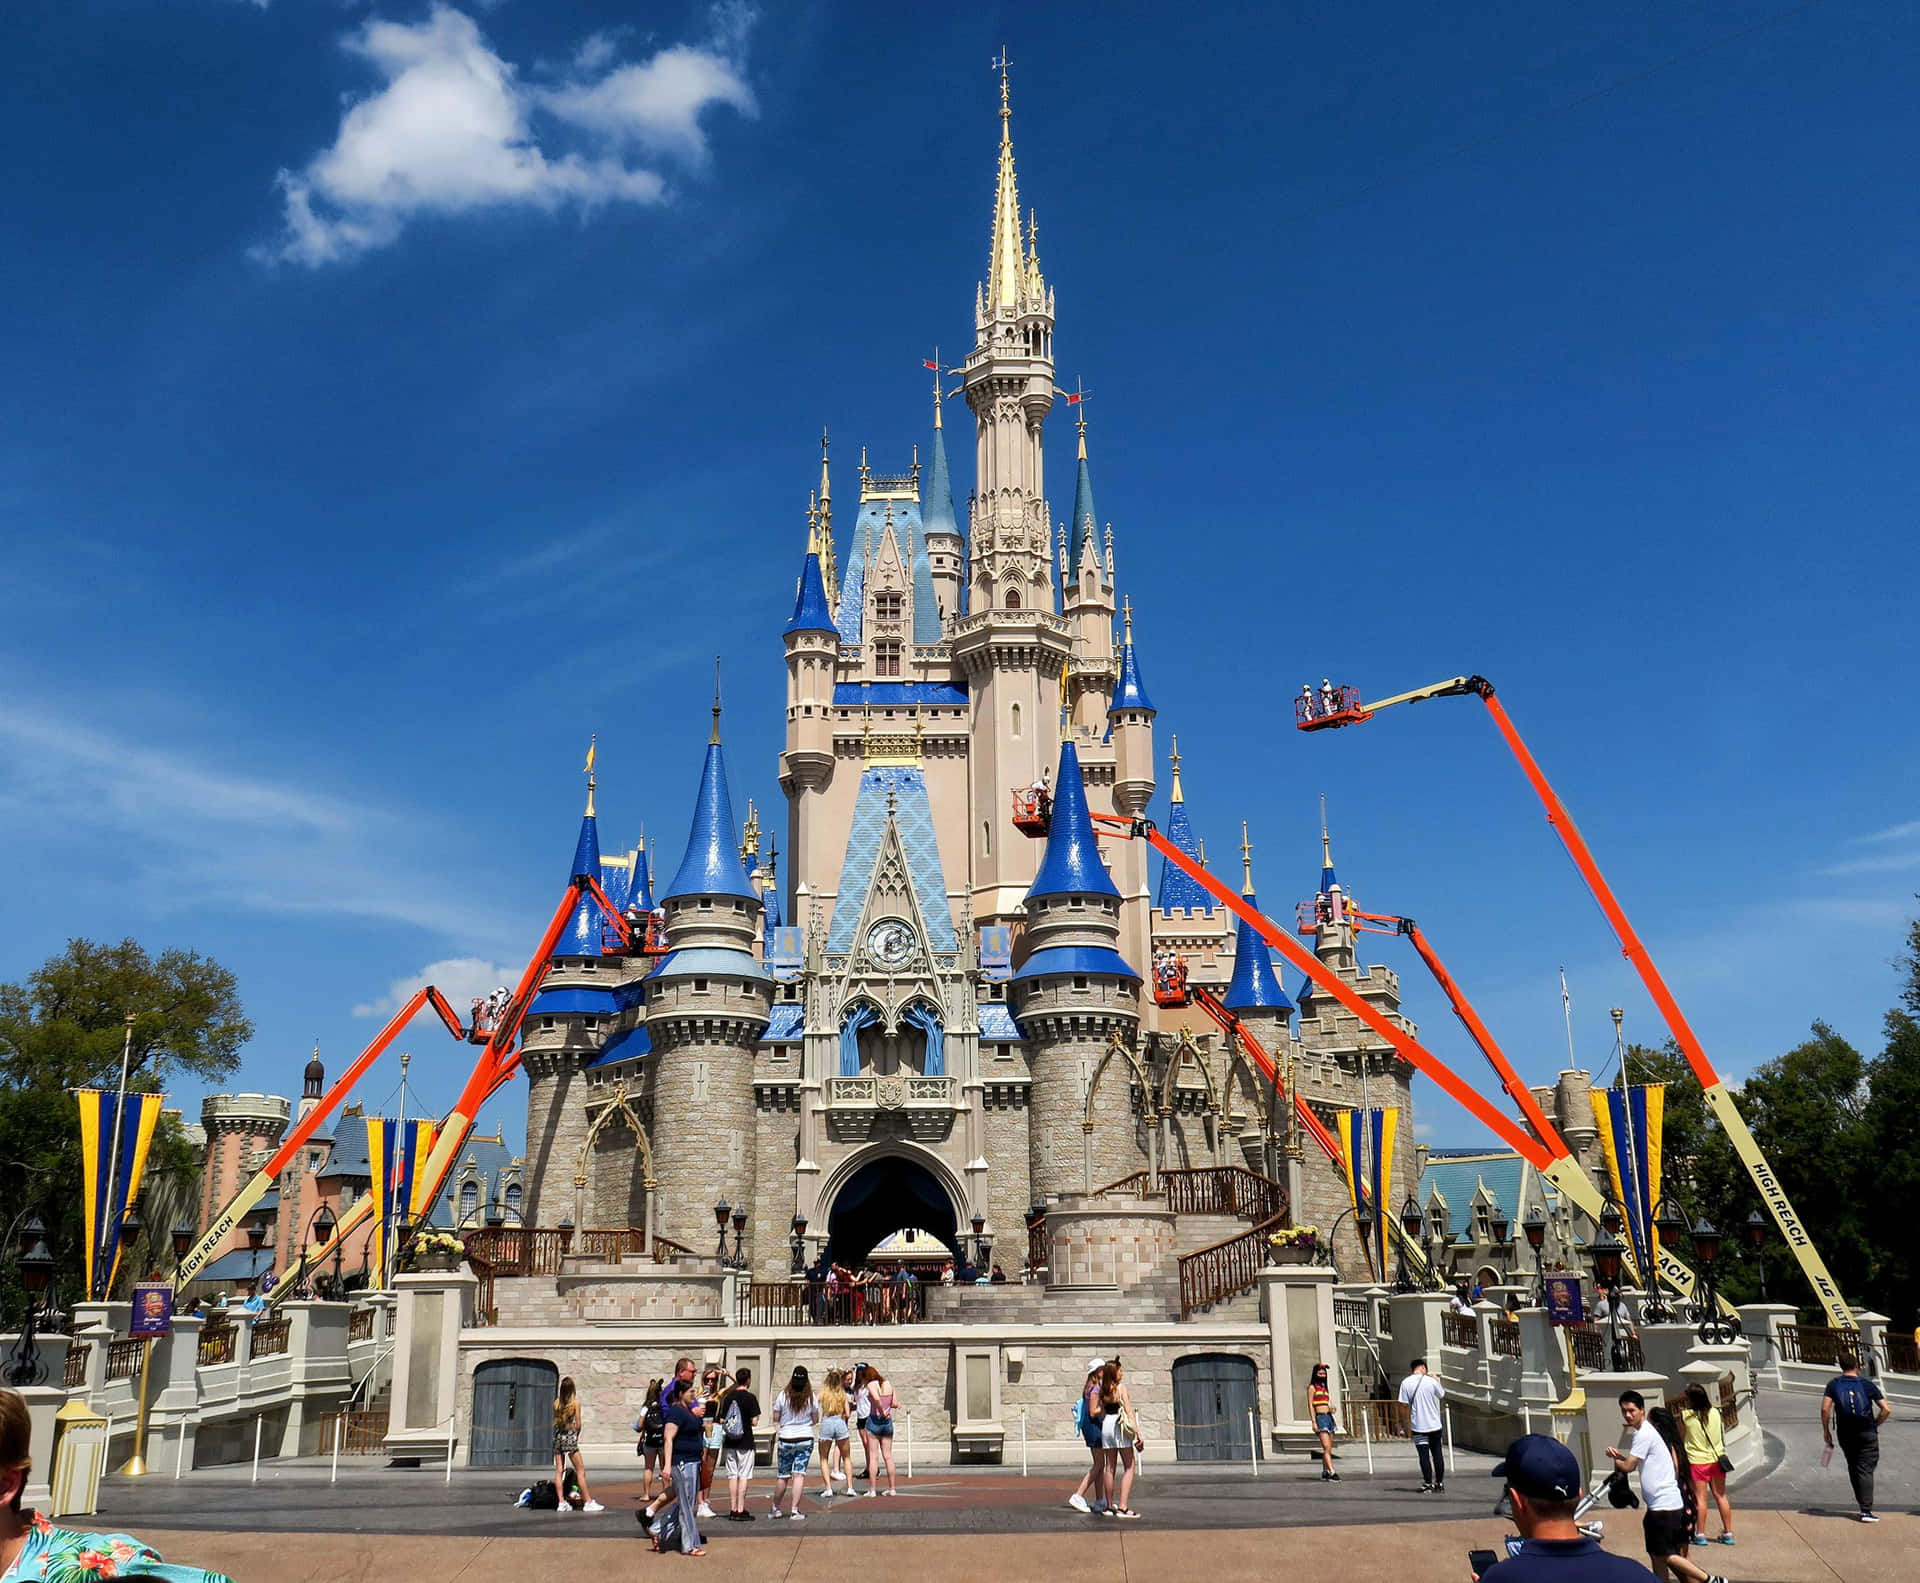 Experience the Magic of Disney in Florida